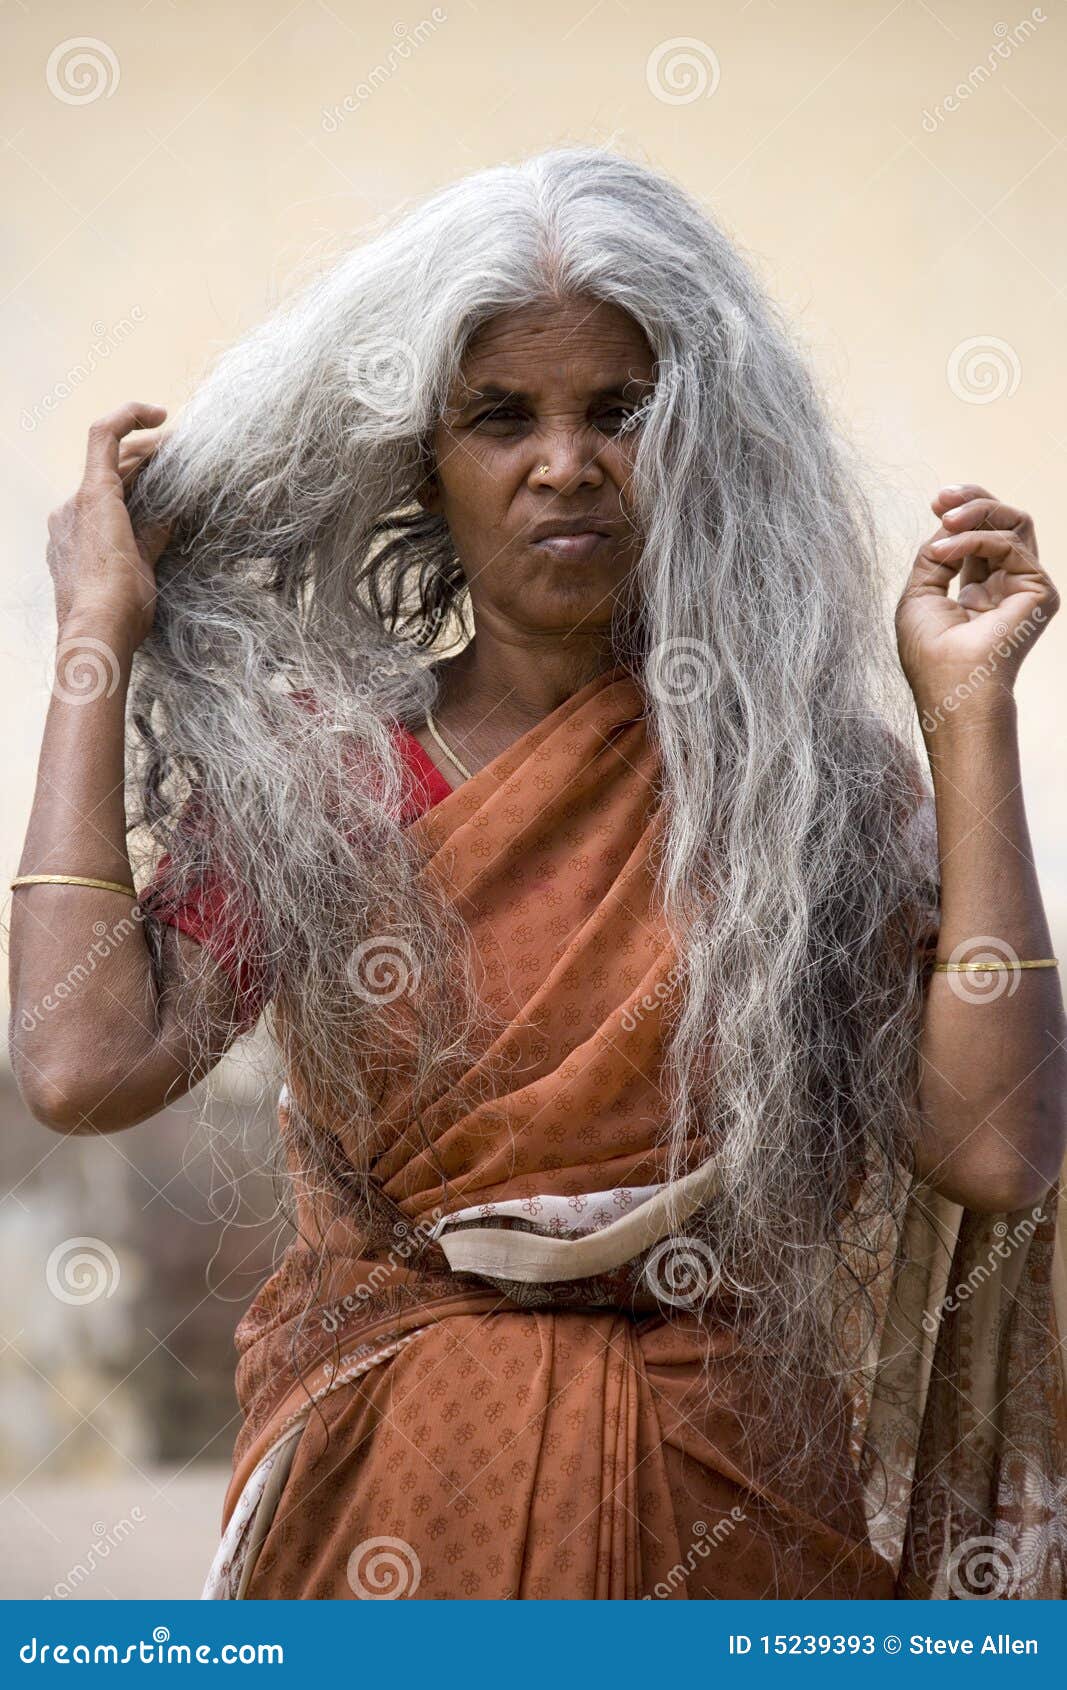 hairy women from india